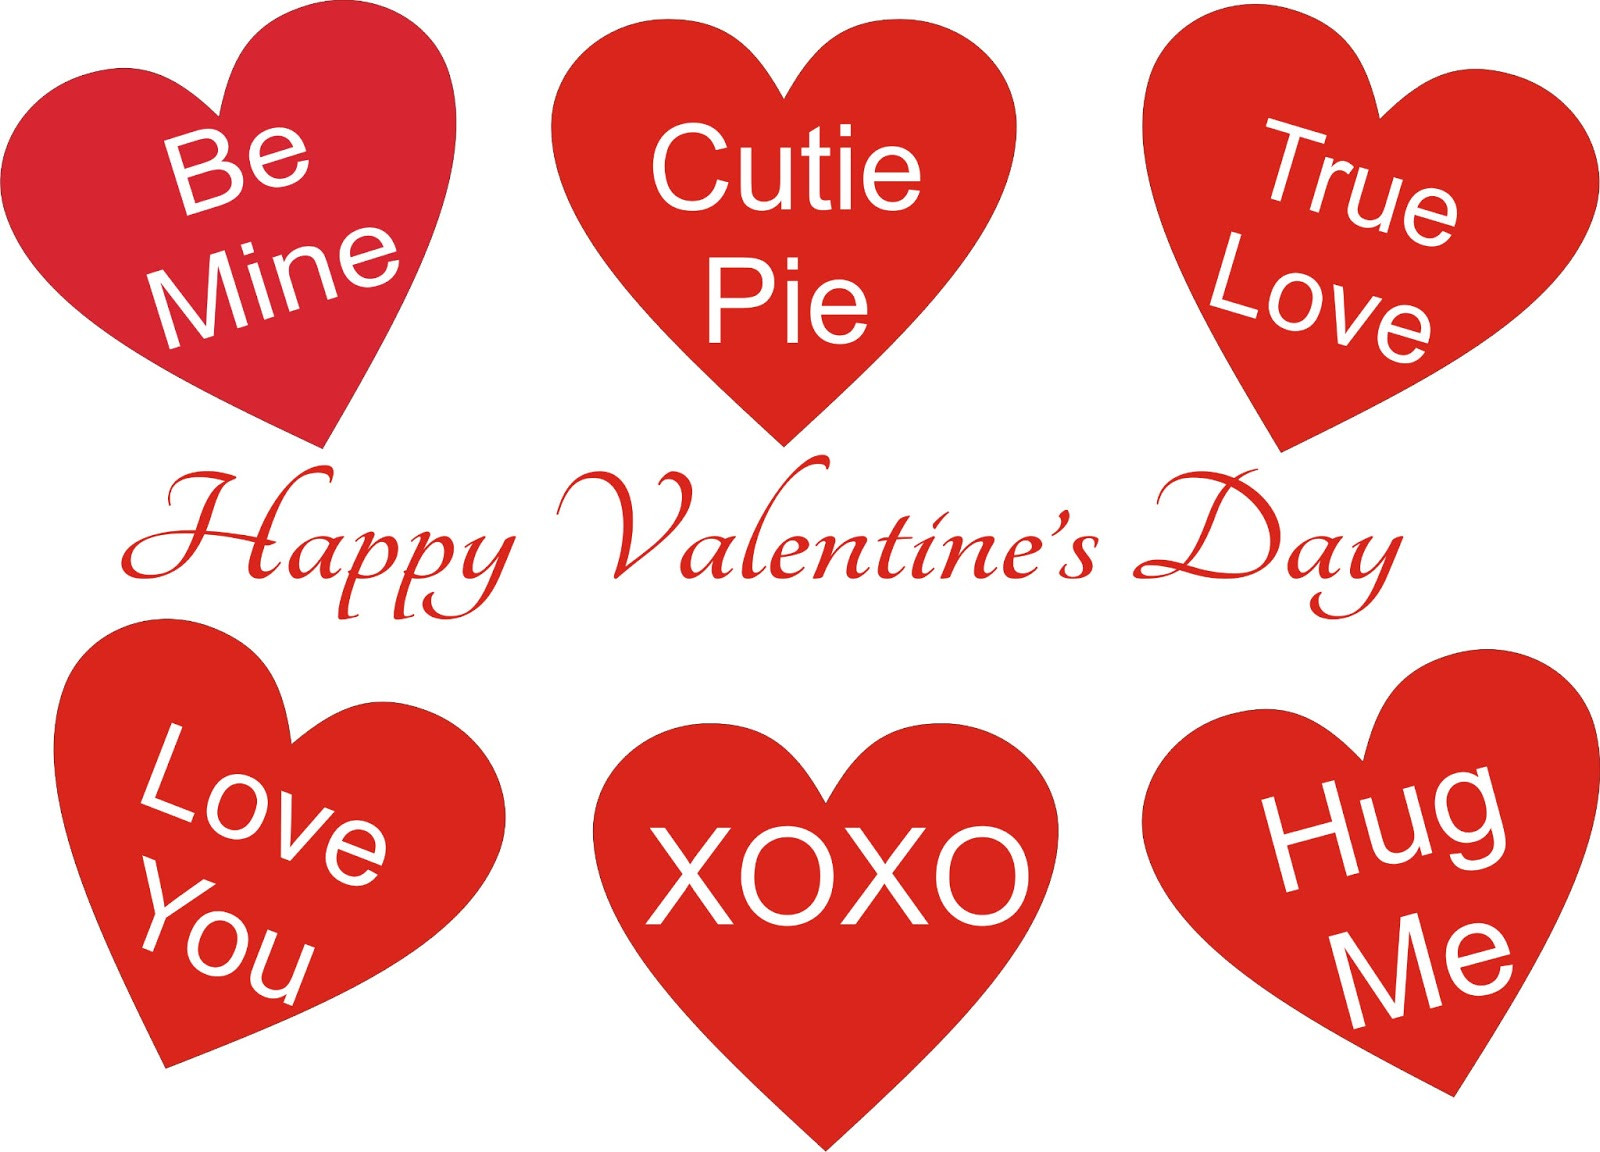 Valentines Day Quotes In Spanish
 Valentine Day SMS Messages Quotes in Spanish Greek